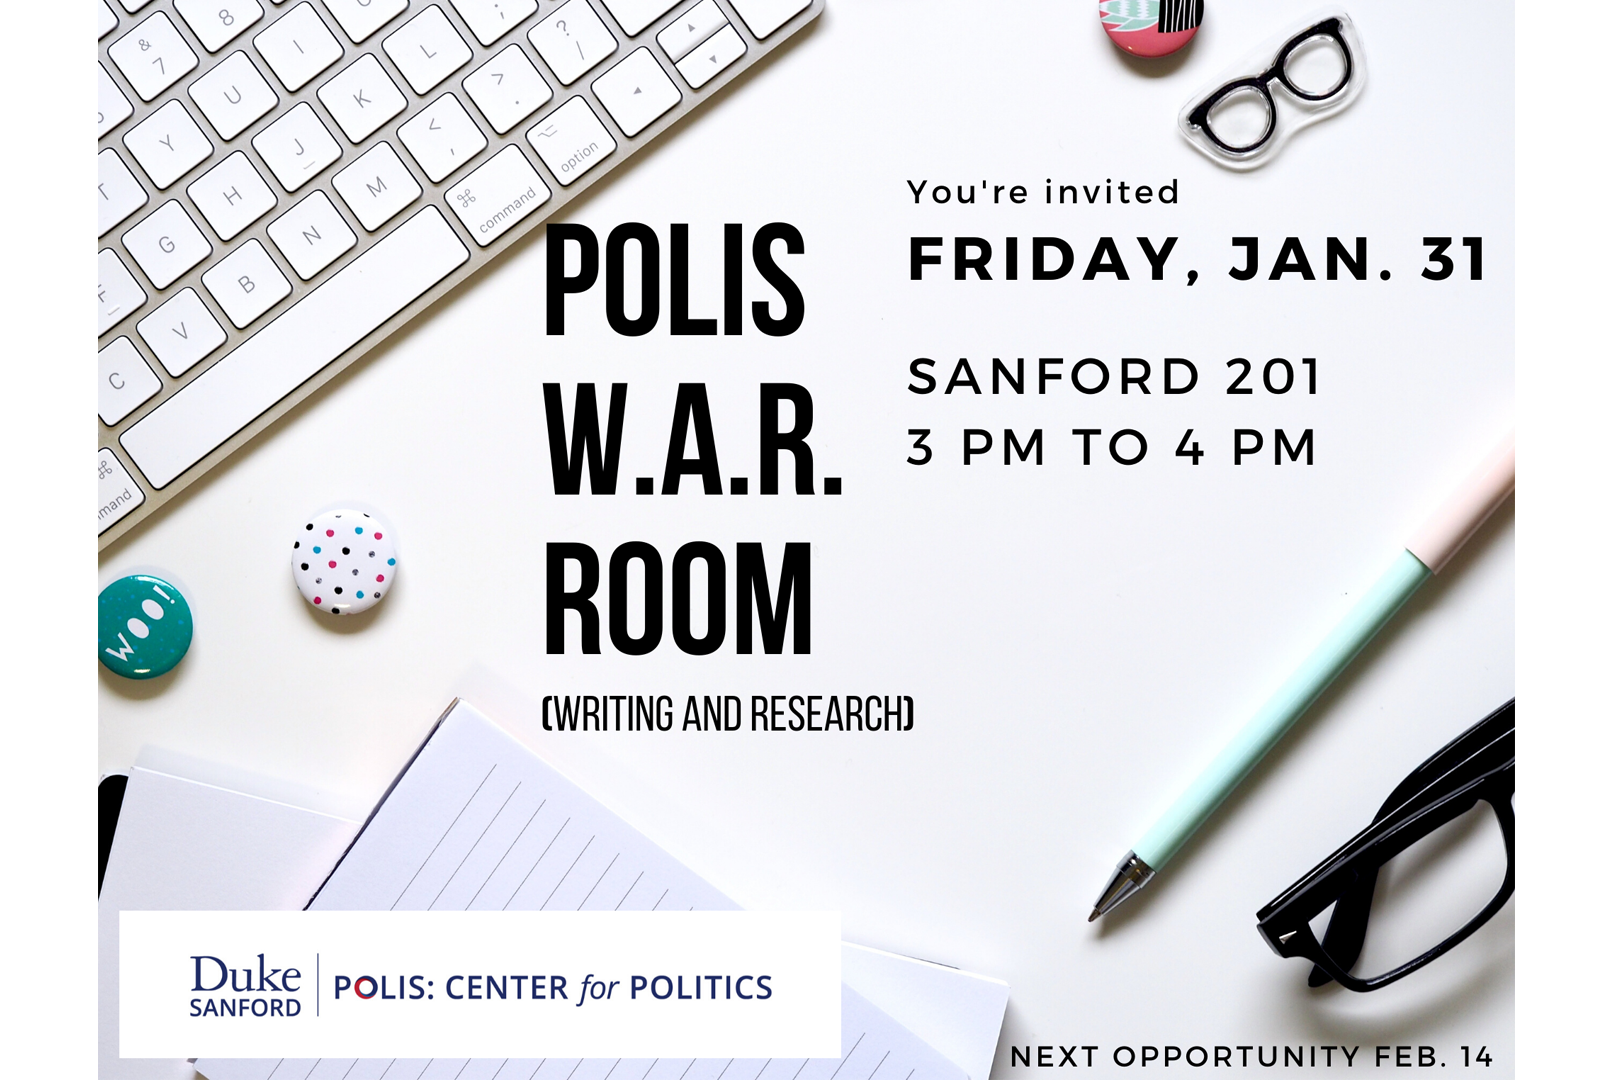 Join us in Sanford 201 at 3pm on Friday